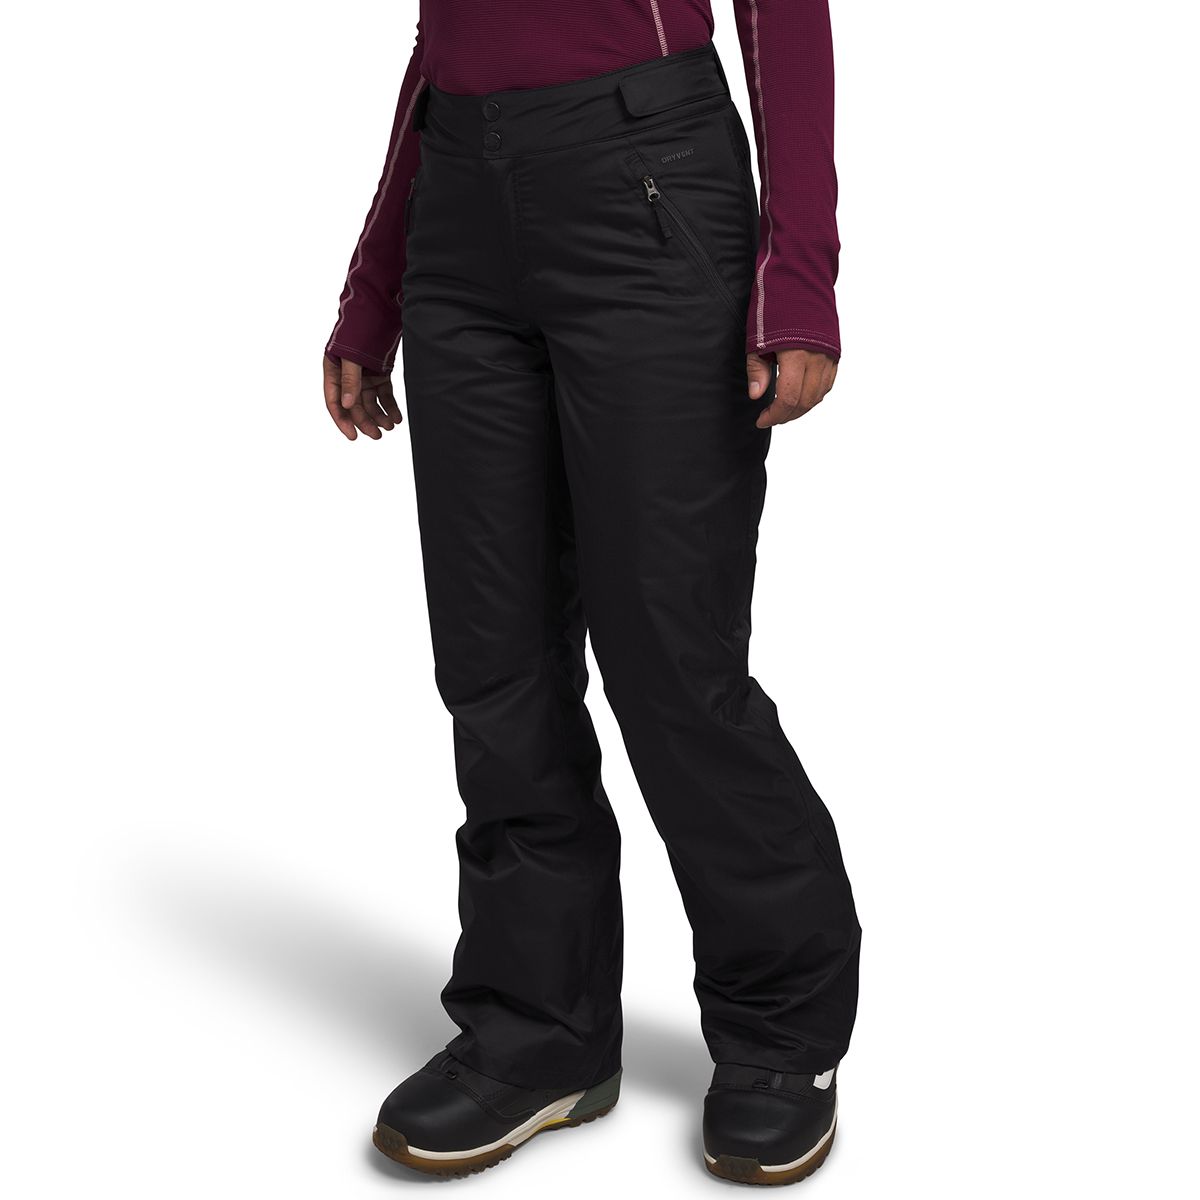 The North Face Pants 10 Black Womens Light Weight Drawstring Solid Neutral  - $46 - From Savannah